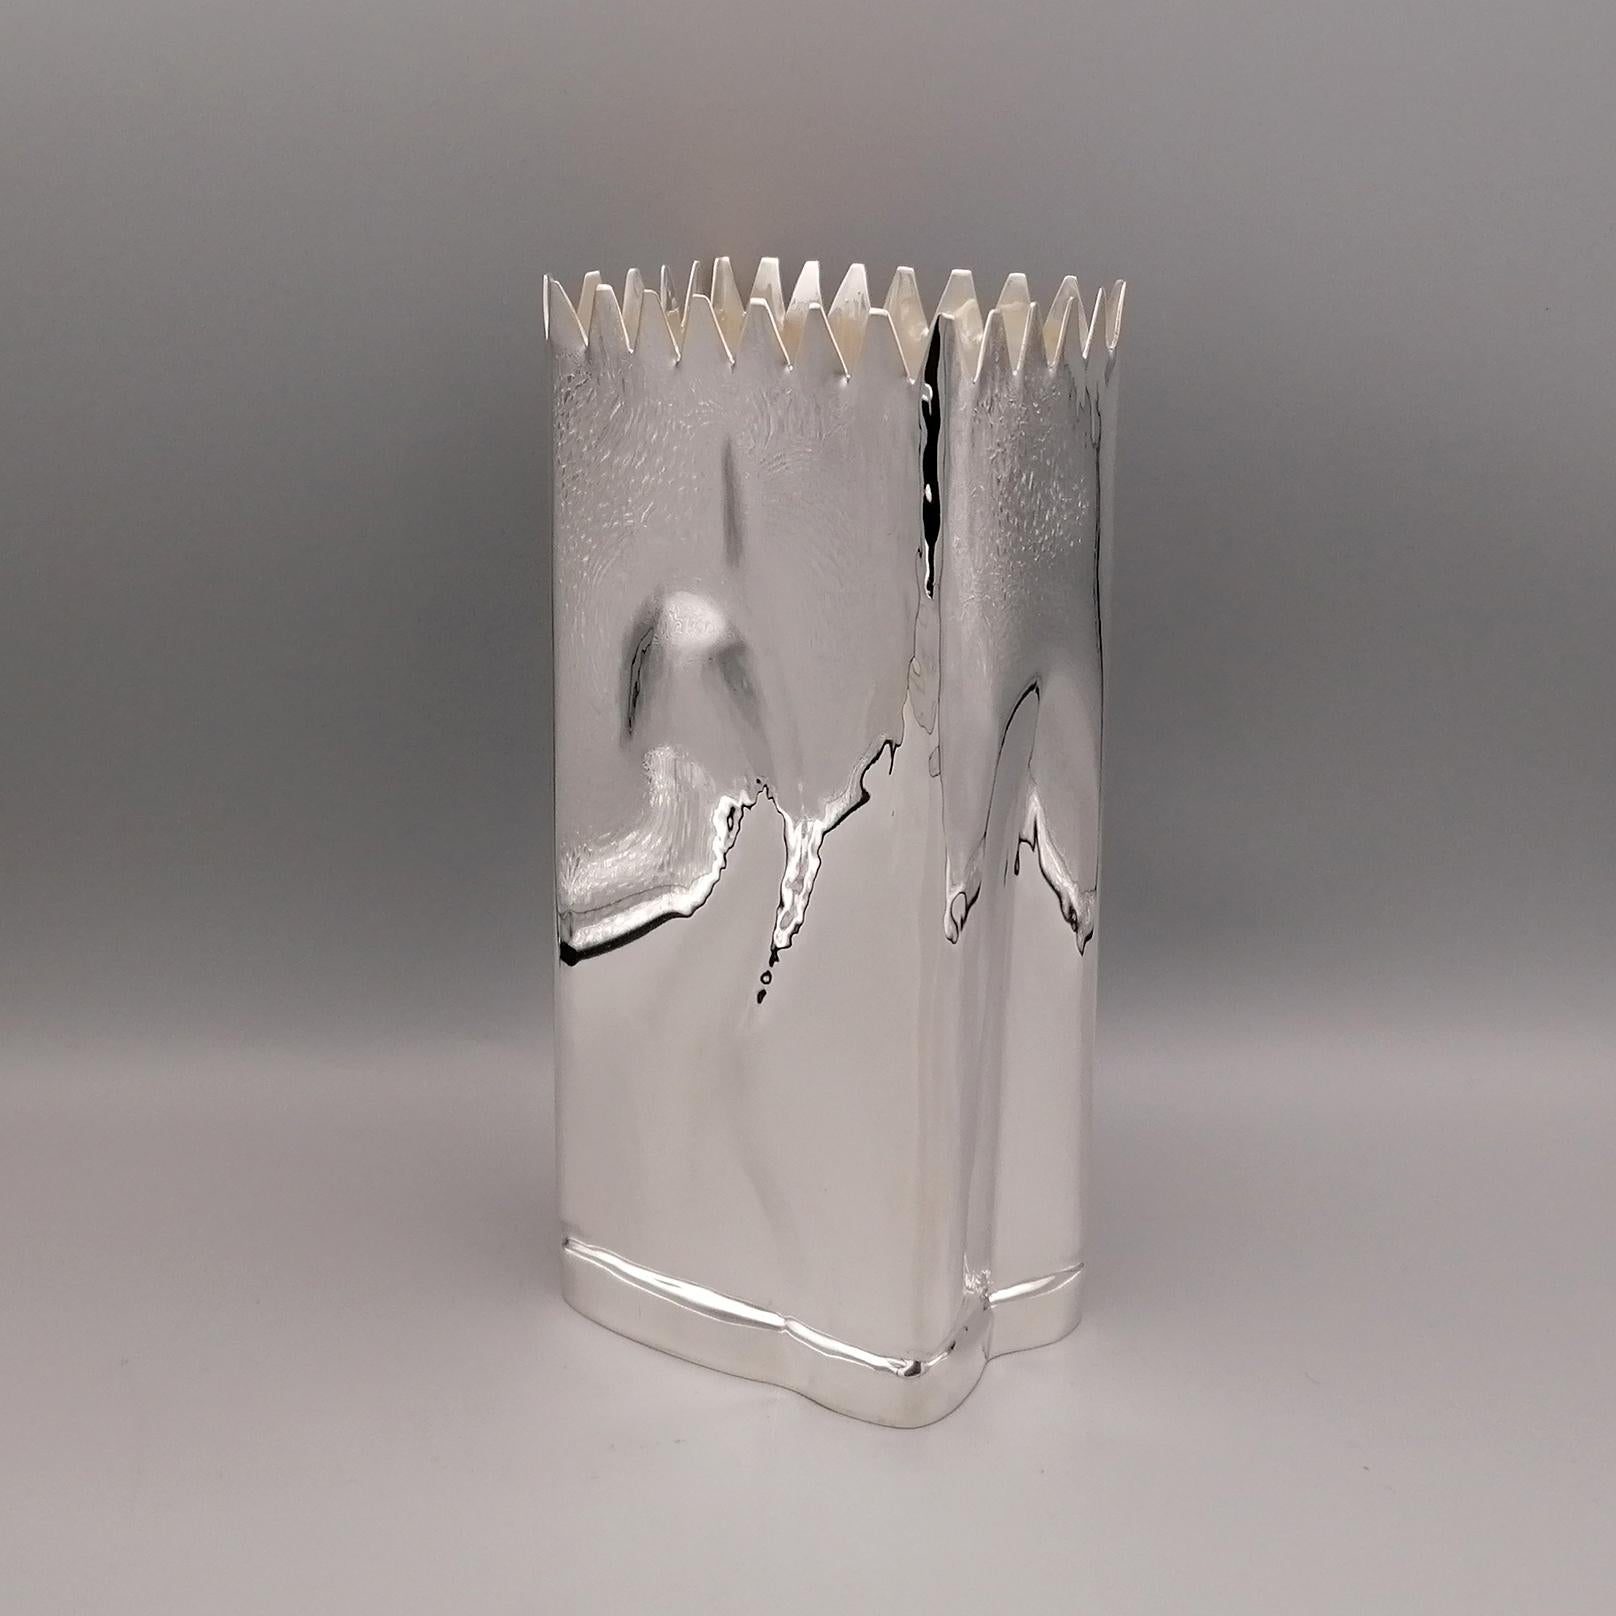 Breadstick holder - 800 solid silver vase
The body is rectangular in shape and was obtained from a sheet of silver and subsequently modelled. All 4 sides of the object have been embossed and chiseled with fantasy motifs, just to give light and